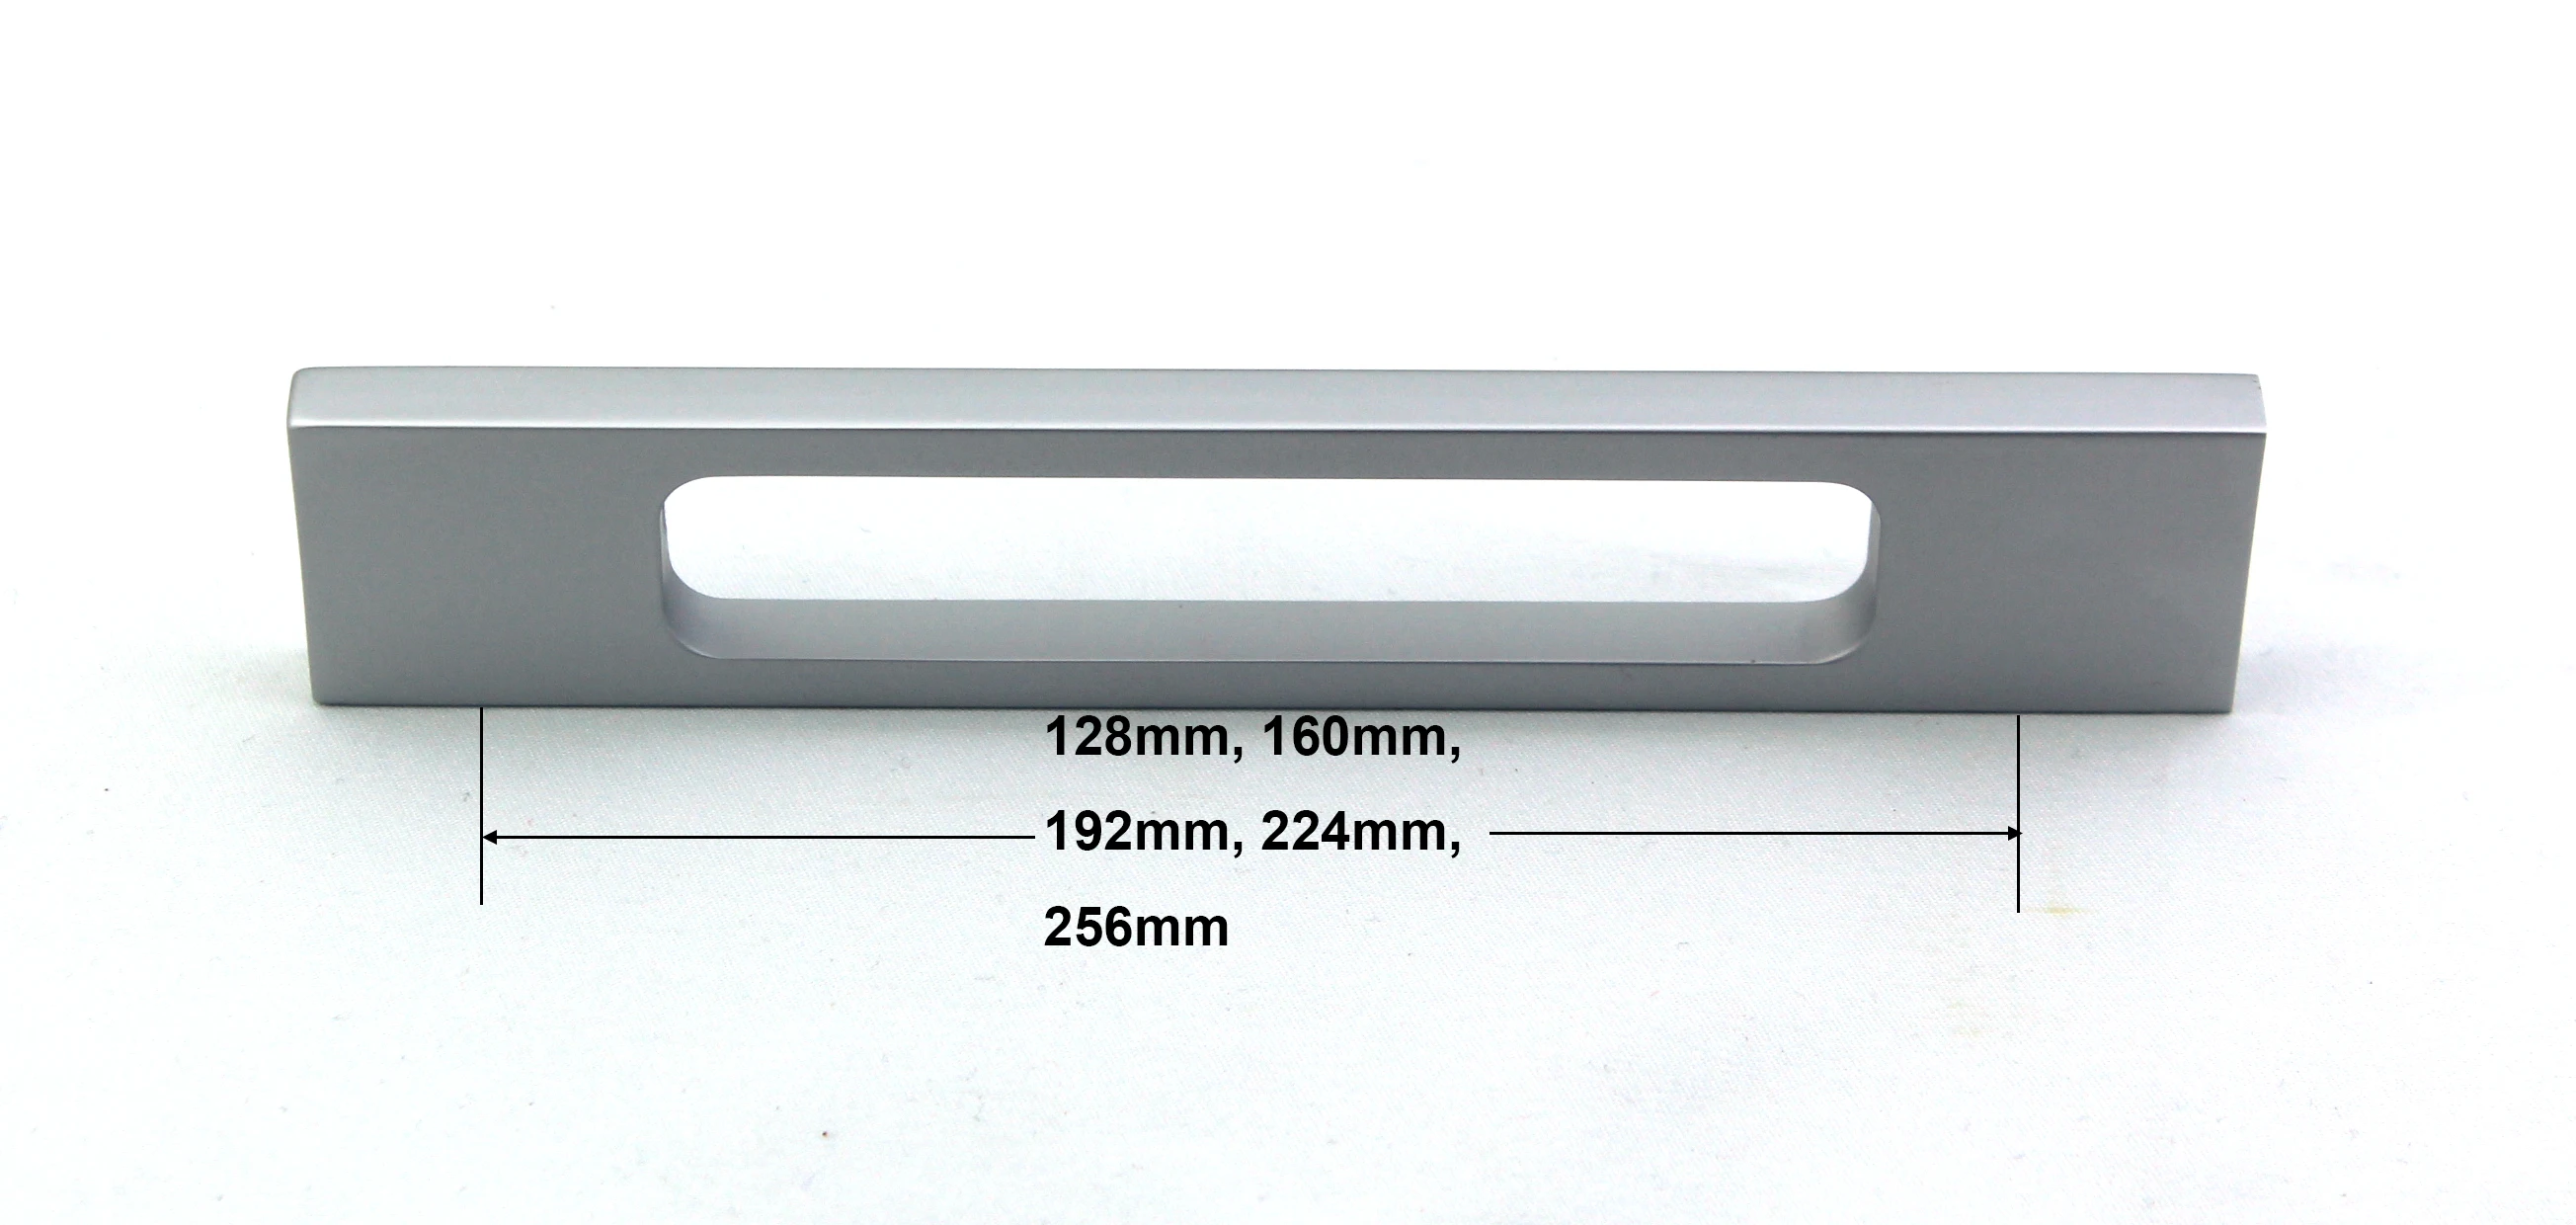 High quality aluminum alloy pull and push kitchen cabinet handles